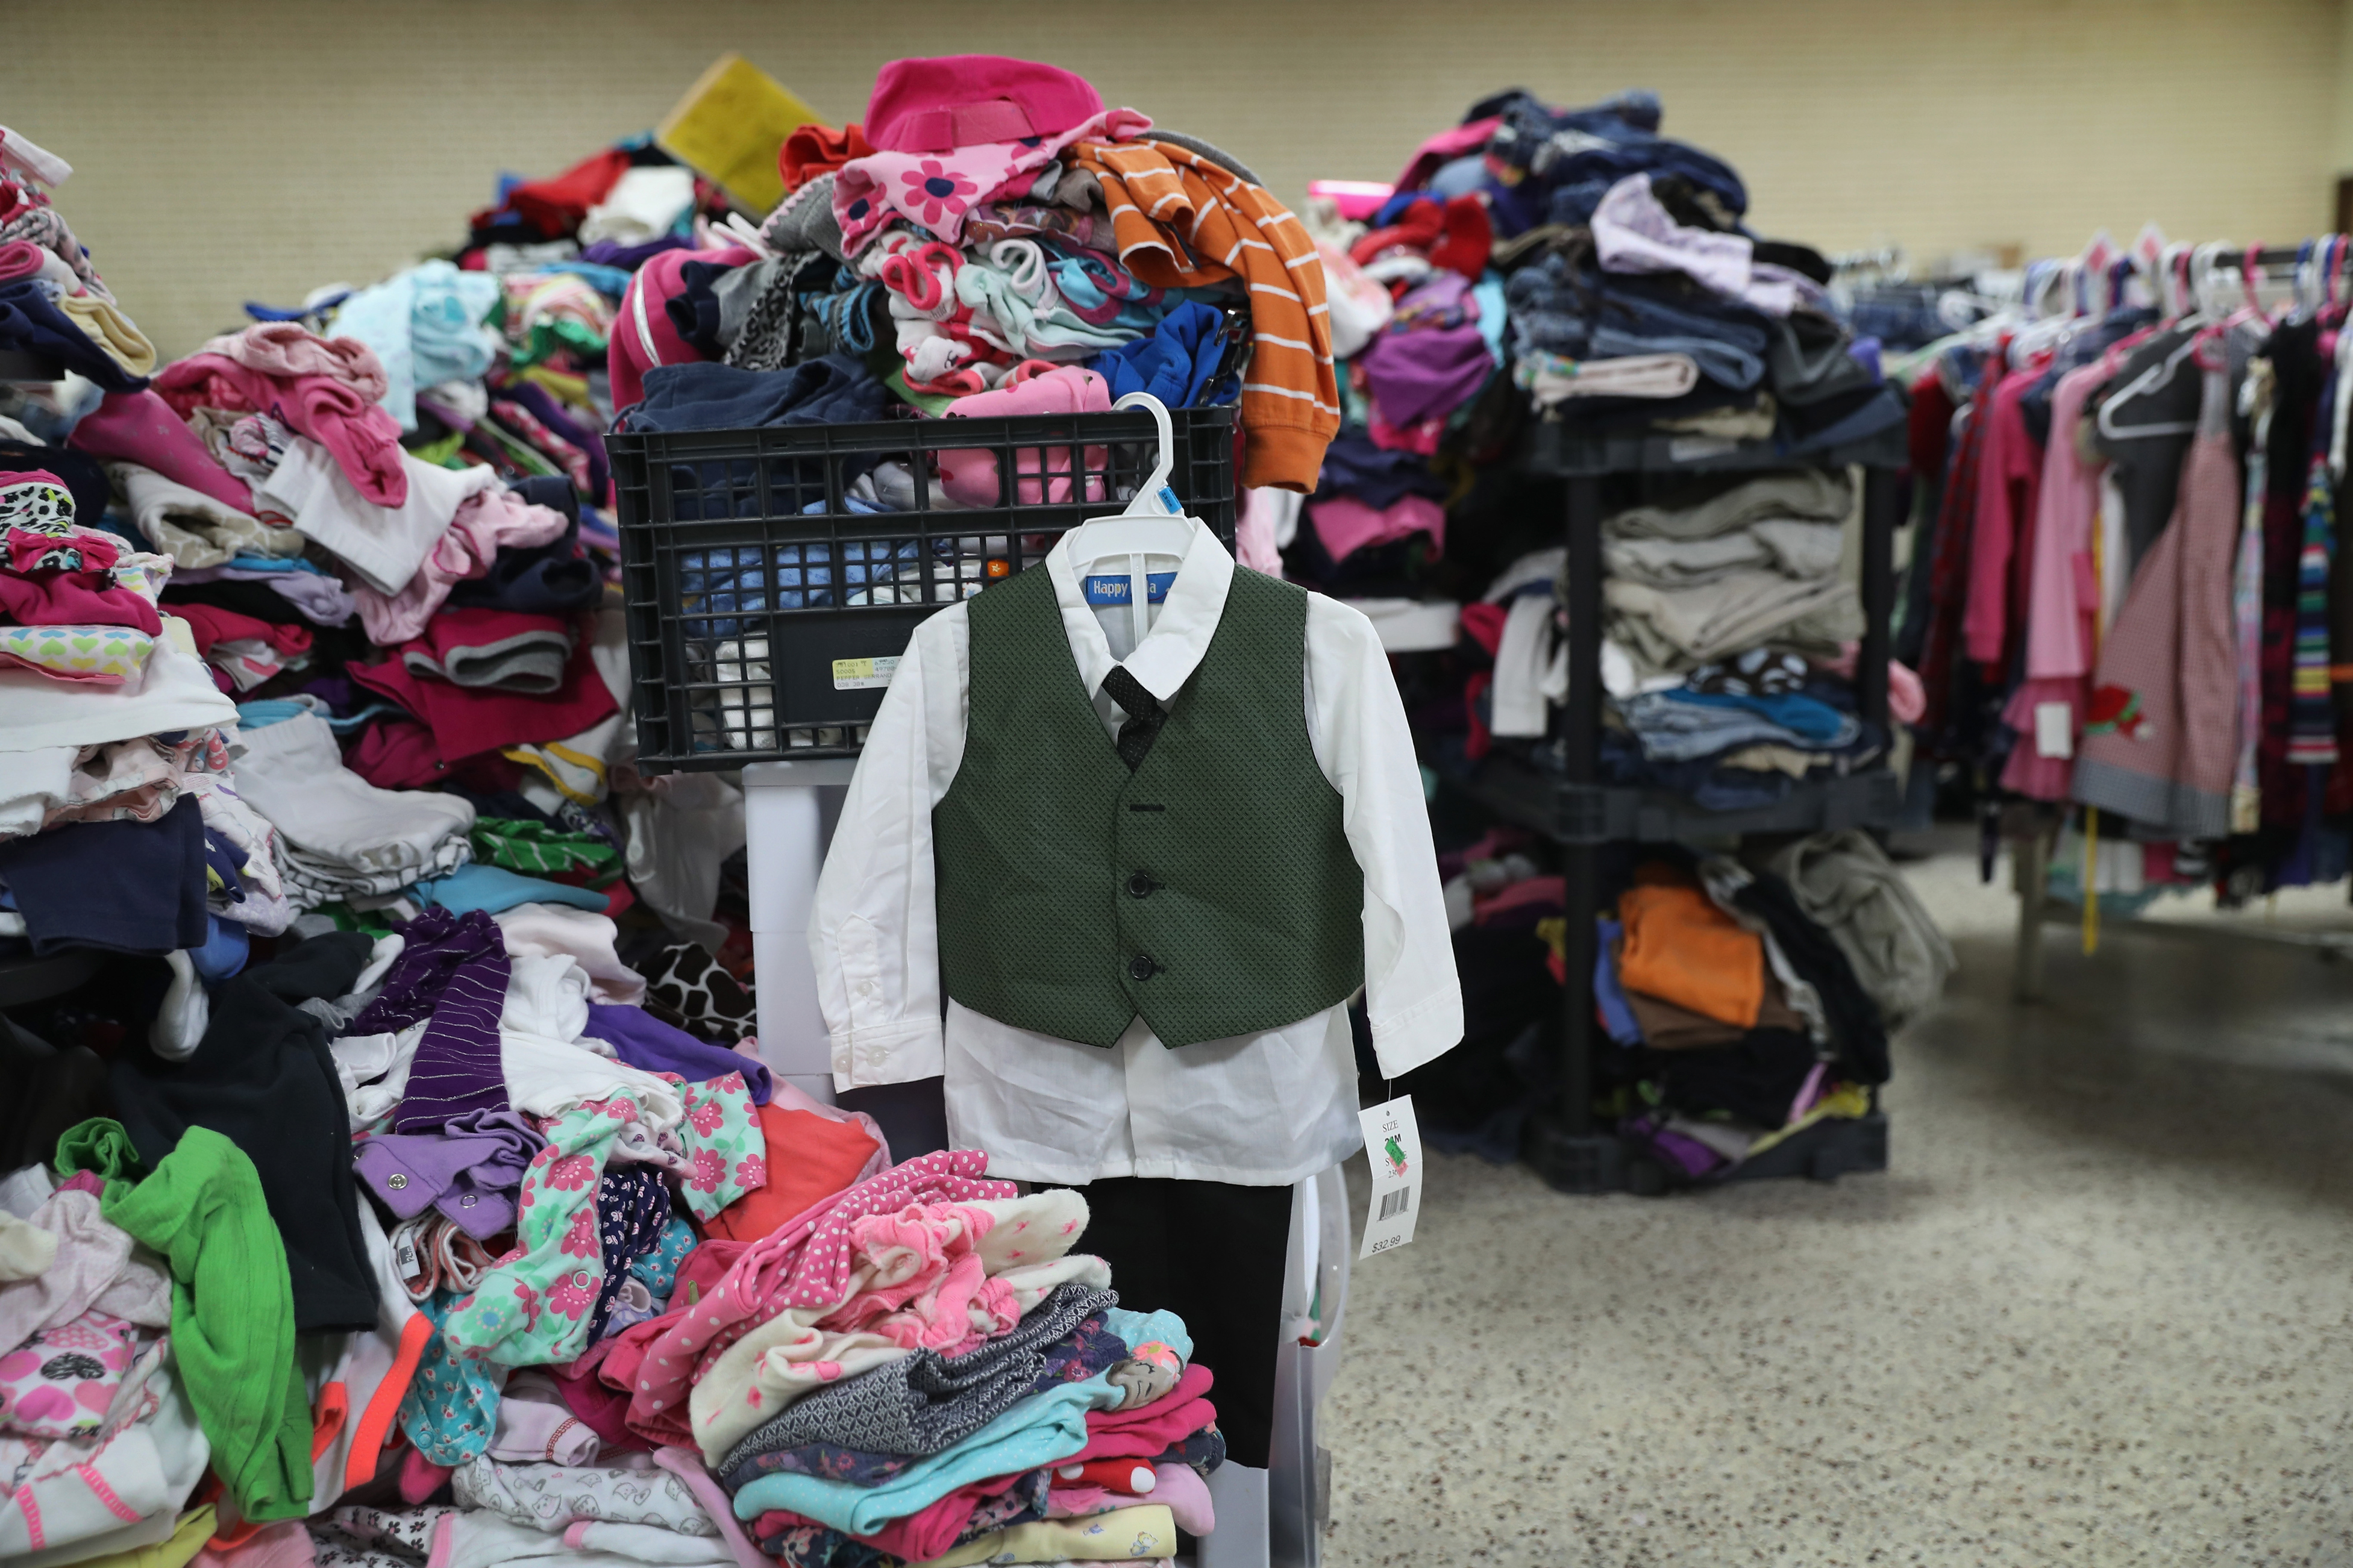 Donated clothing await immigrants at the Catholic Sacred Heart Church Immigrant Respite Center from McAllen, Texas on Aug. 15, 2016. (John Moore—Getty Images)